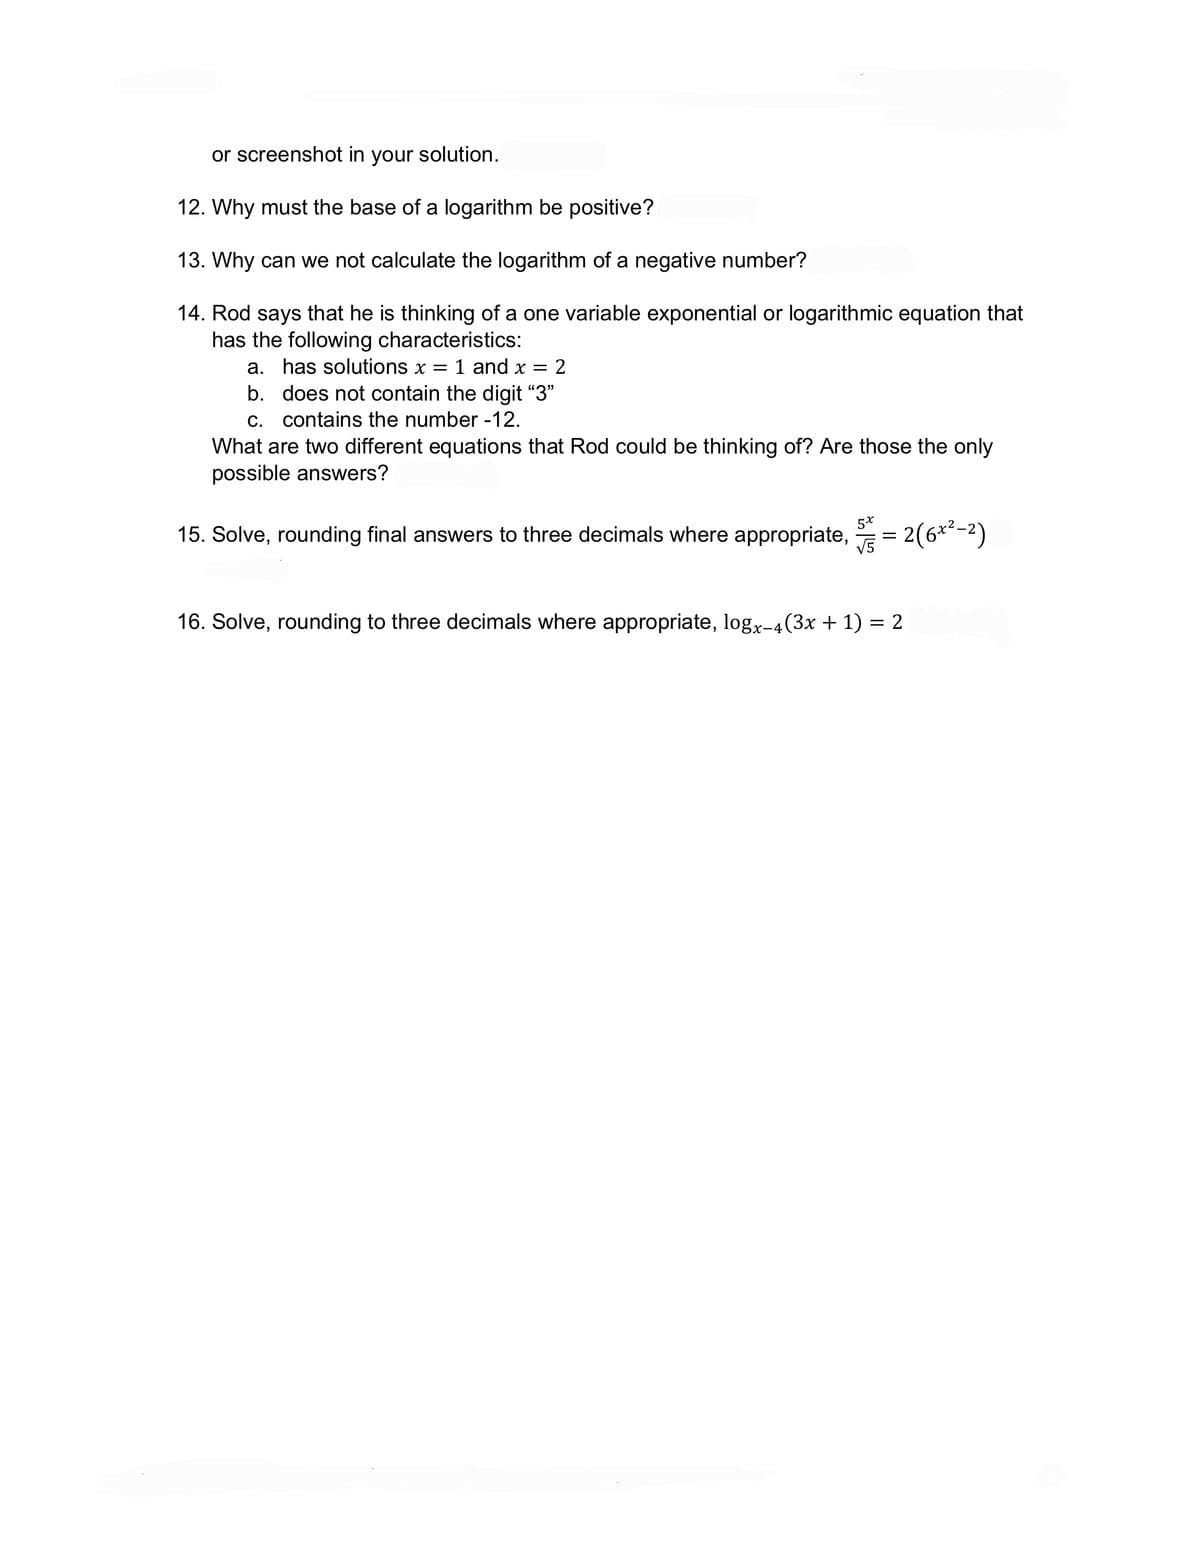 or screenshot in your solution.
12. Why must the base of a logarithm be positive?
13. Why can we not calculate the logarithm of a negative number?
14. Rod says that he is thinking of a one variable exponential or logarithmic equation that
has the following characteristics:
a. has solutions x 1 and x = 2
b. does not contain the digit "3"
c. contains the number -12.
What are two different equations that Rod could be thinking of? Are those the only
possible answers?
15. Solve, rounding final answers to three decimals where appropriate, = 2(6x²-²)
5x
√5
16. Solve, rounding to three decimals where appropriate, logx-4(3x + 1) = 2